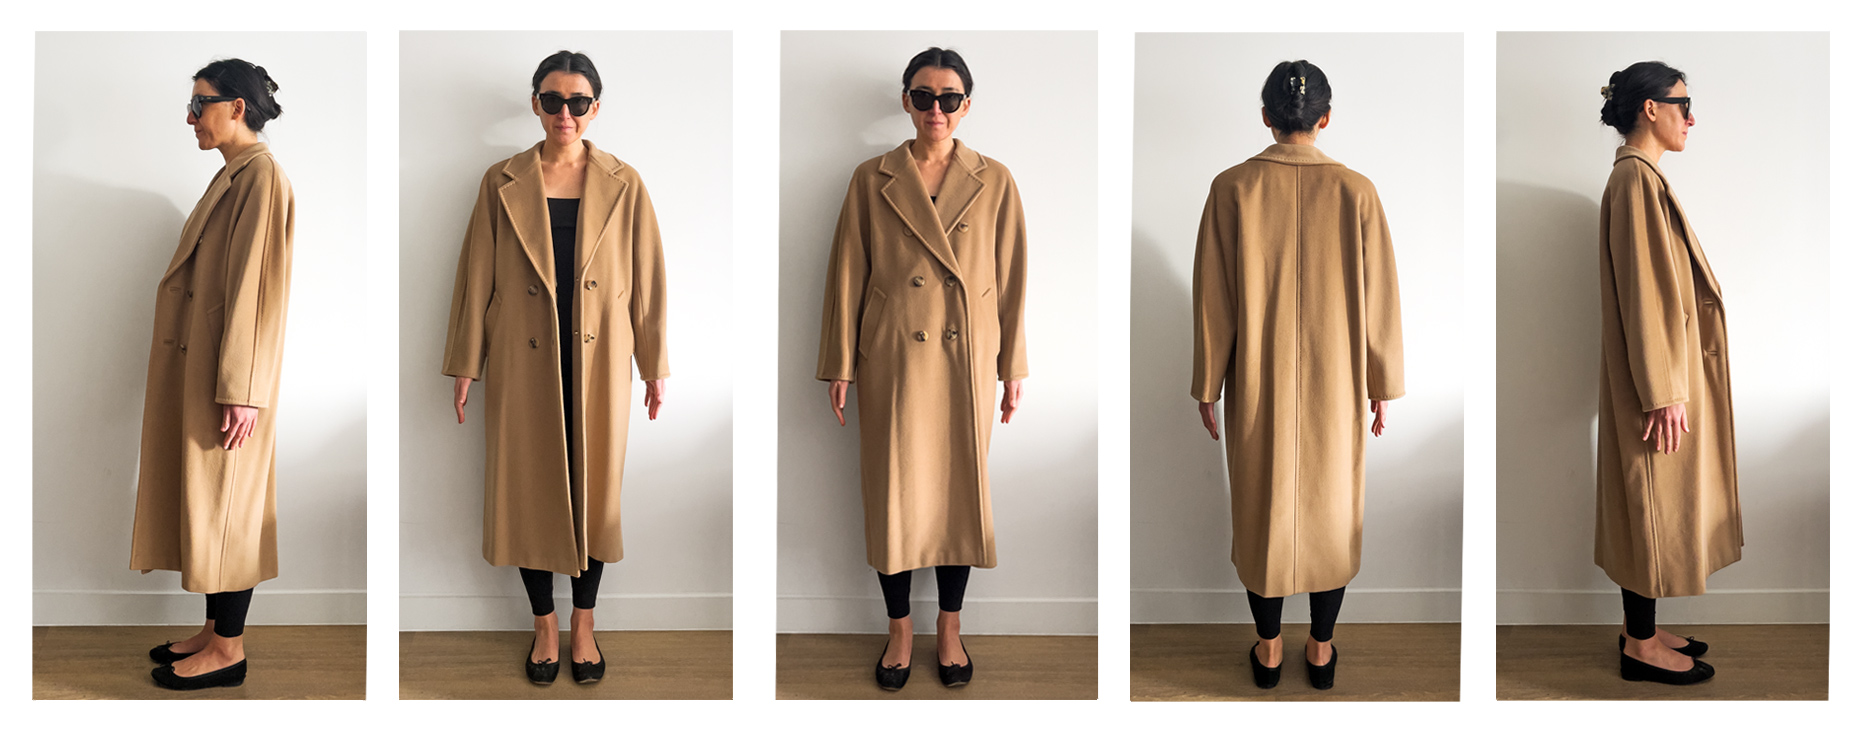 Showing how a Max Mara Madame coat looks on a 5'5.75" woman's frame